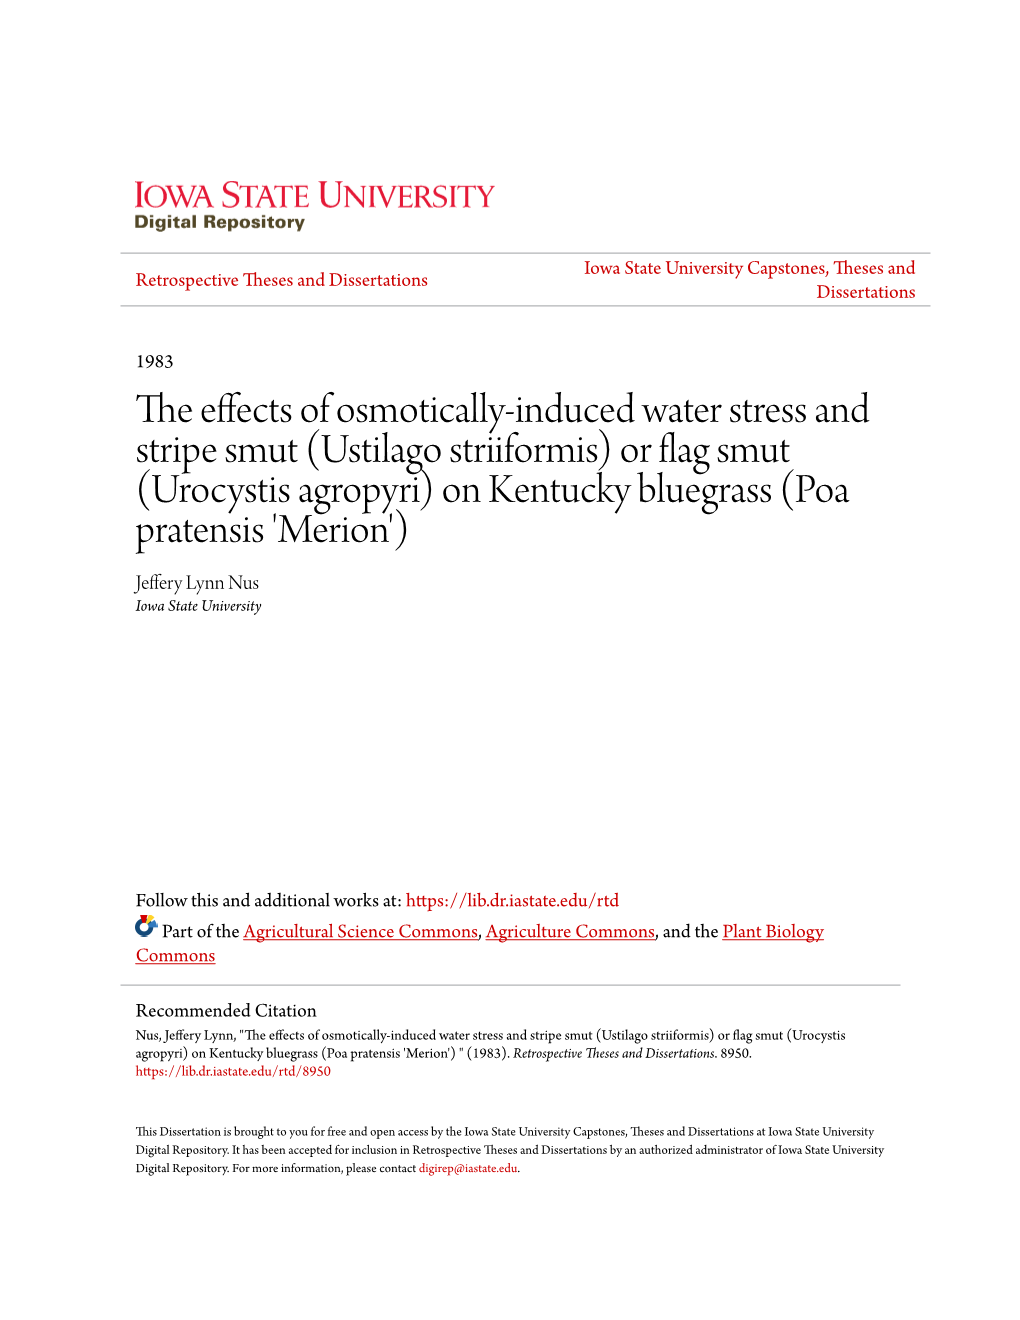 The Effects of Osmotically-Induced Water Stress and Stripe Smut